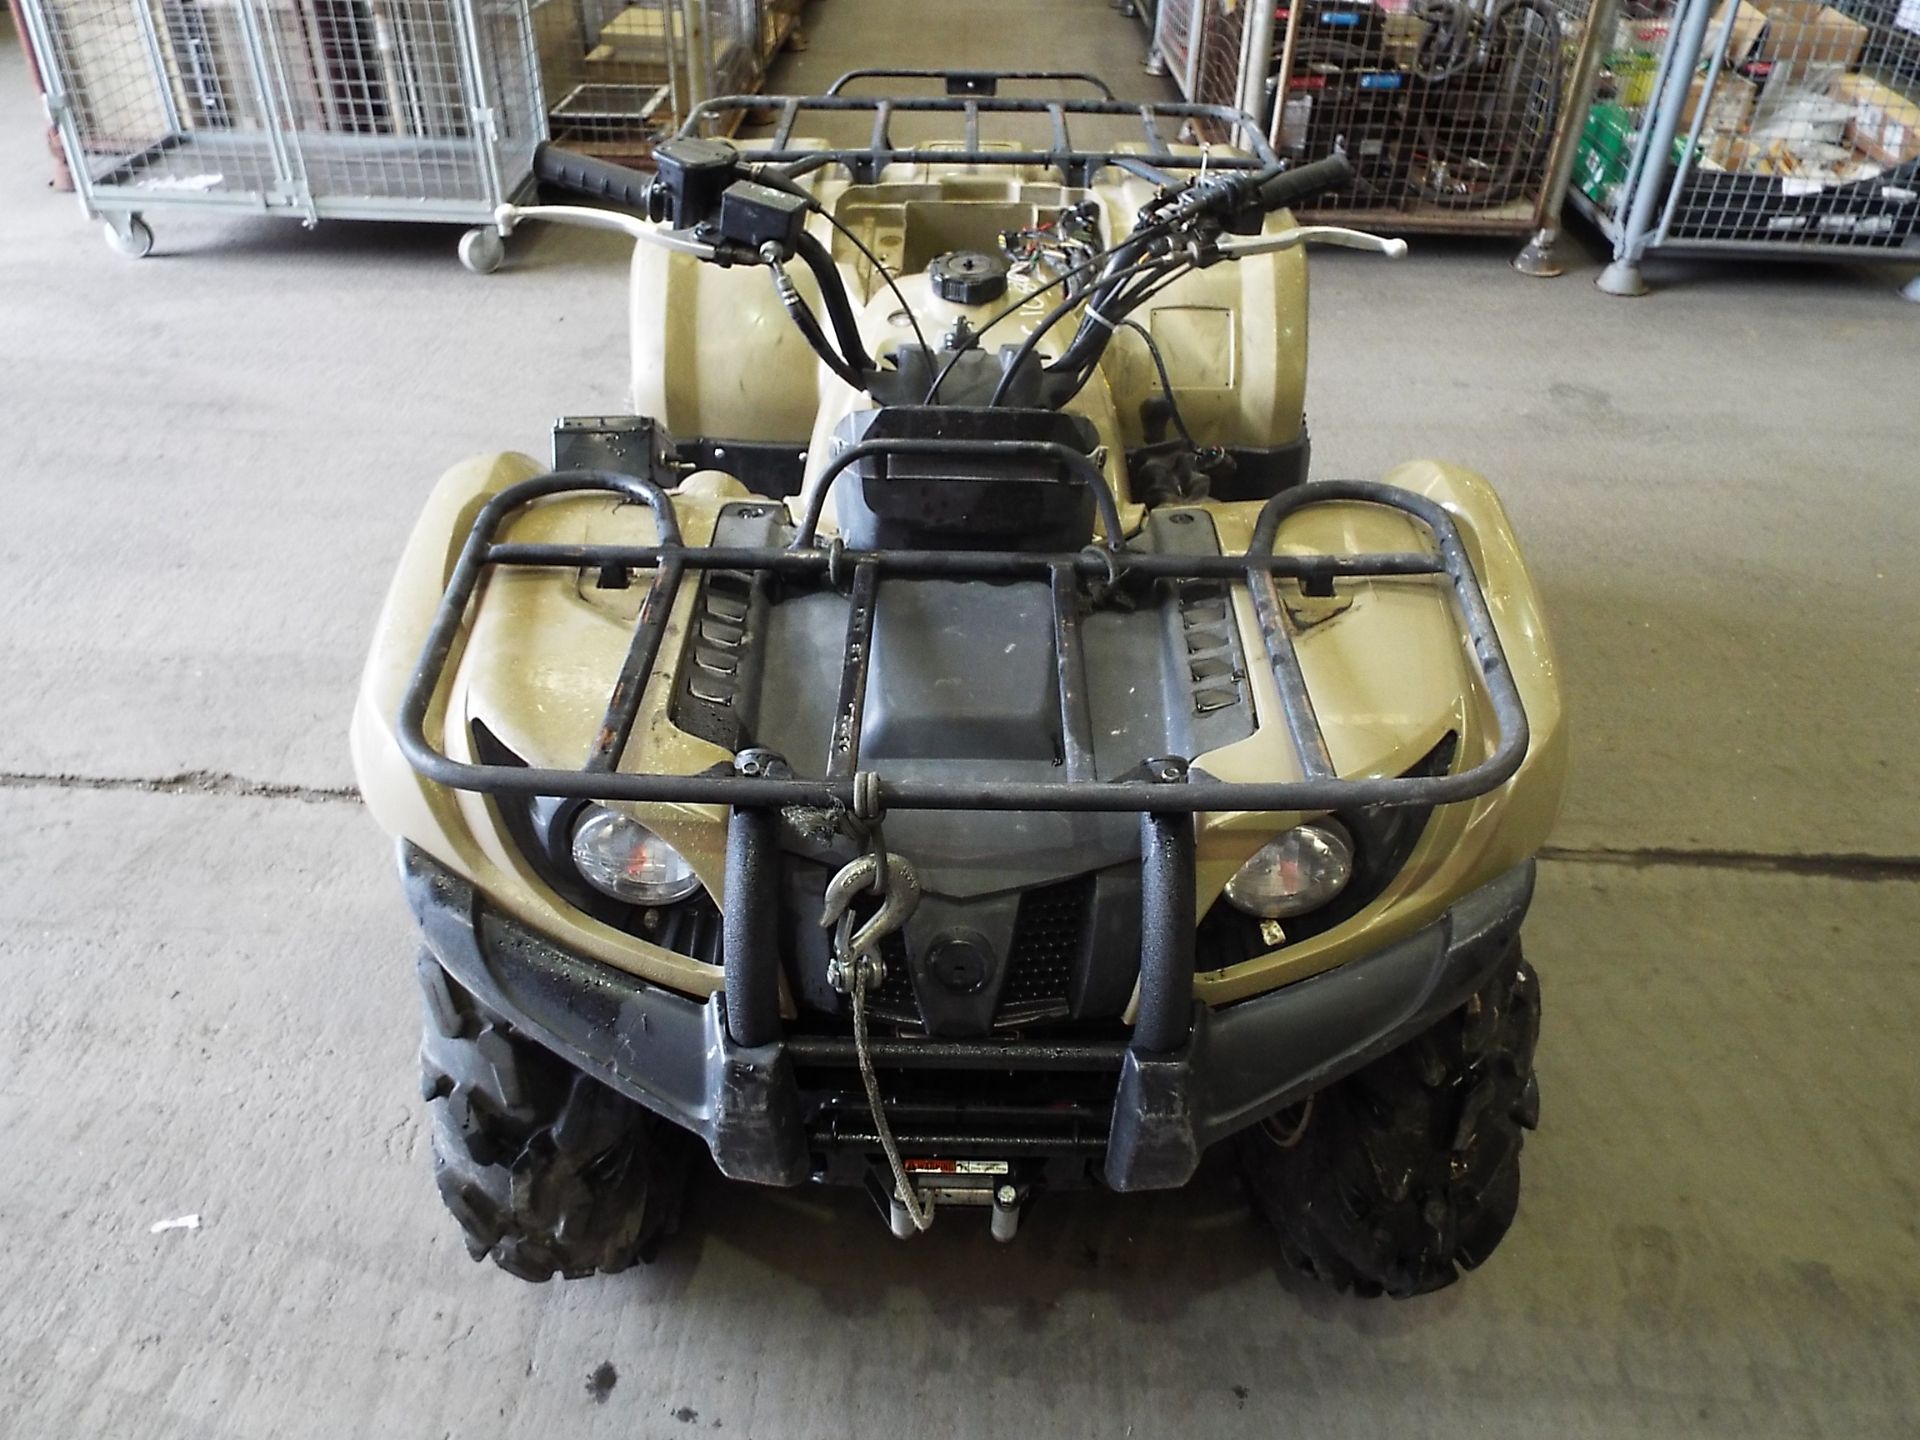 Military Specification Yamaha Grizzly 450 4 x 4 ATV Quad Bike Complete with Winch - Image 2 of 18